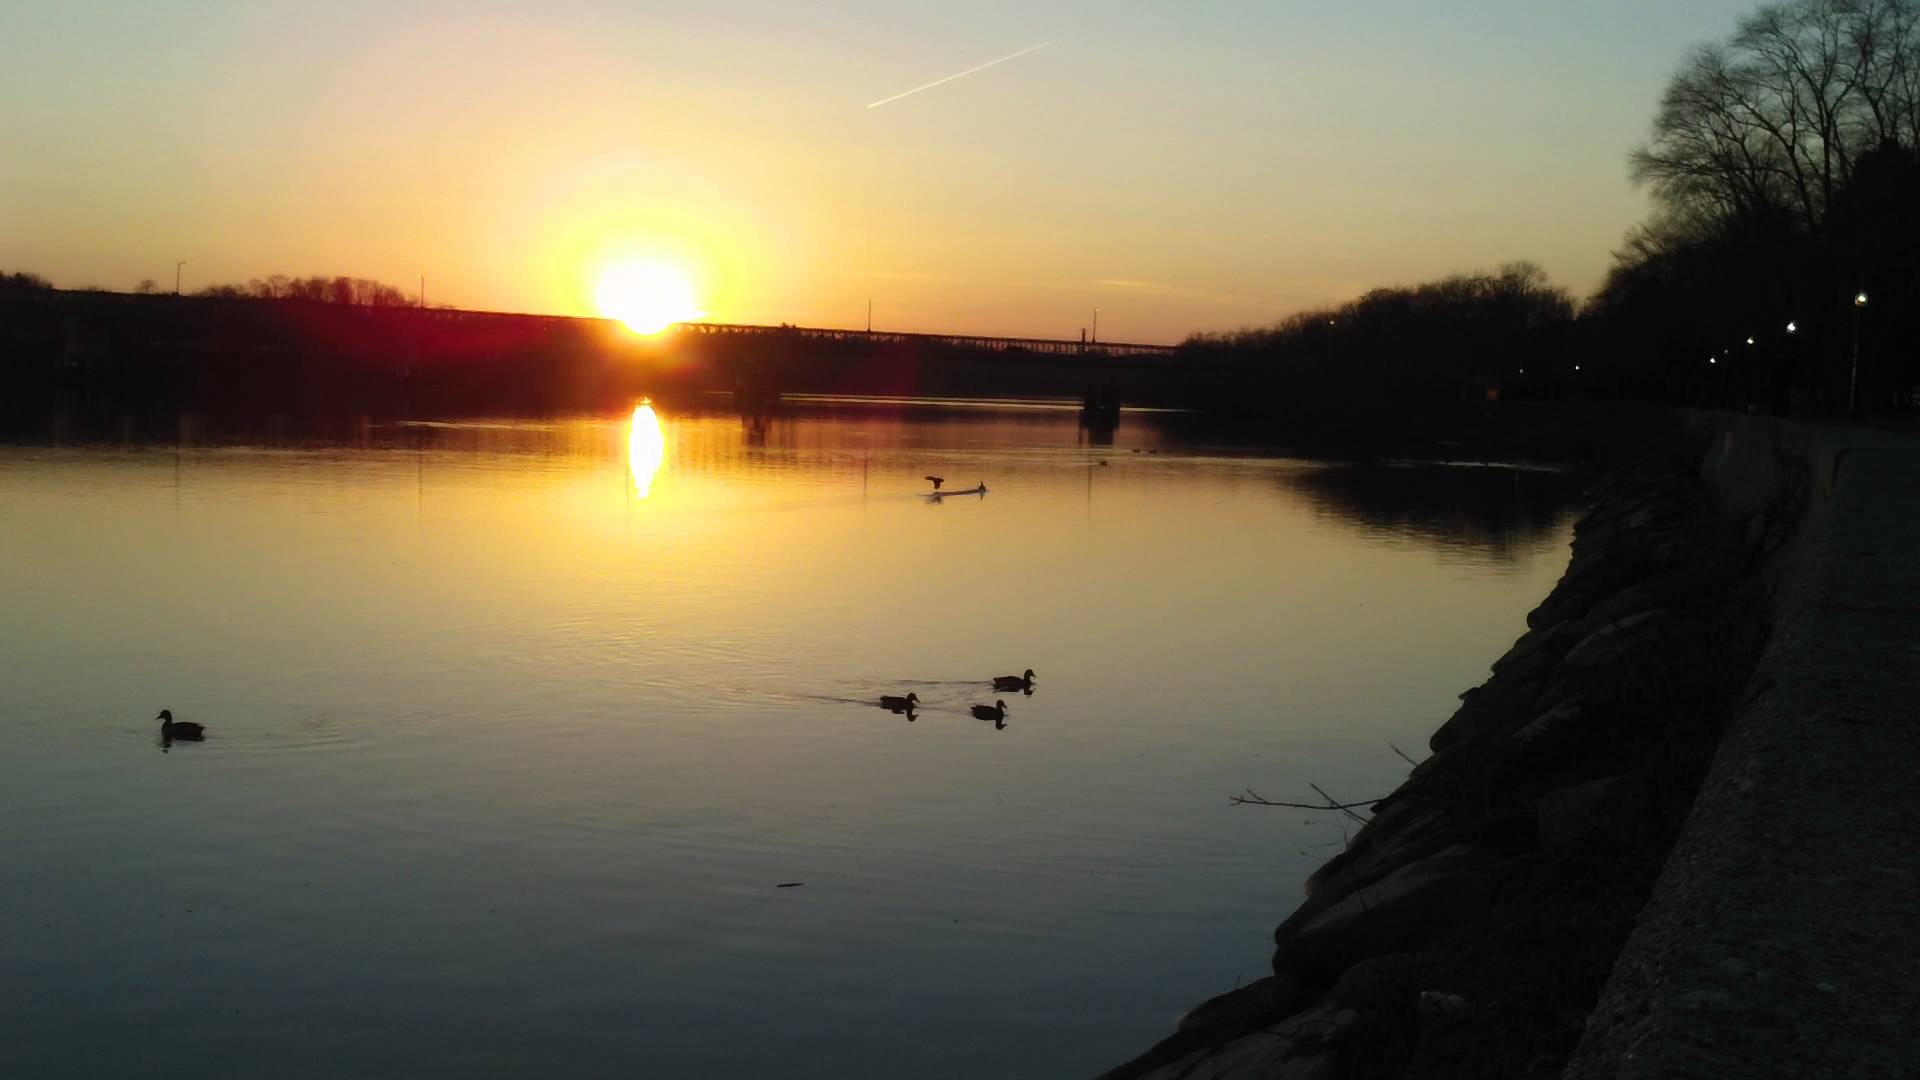 Peaceful Sunset at the River - YouTube